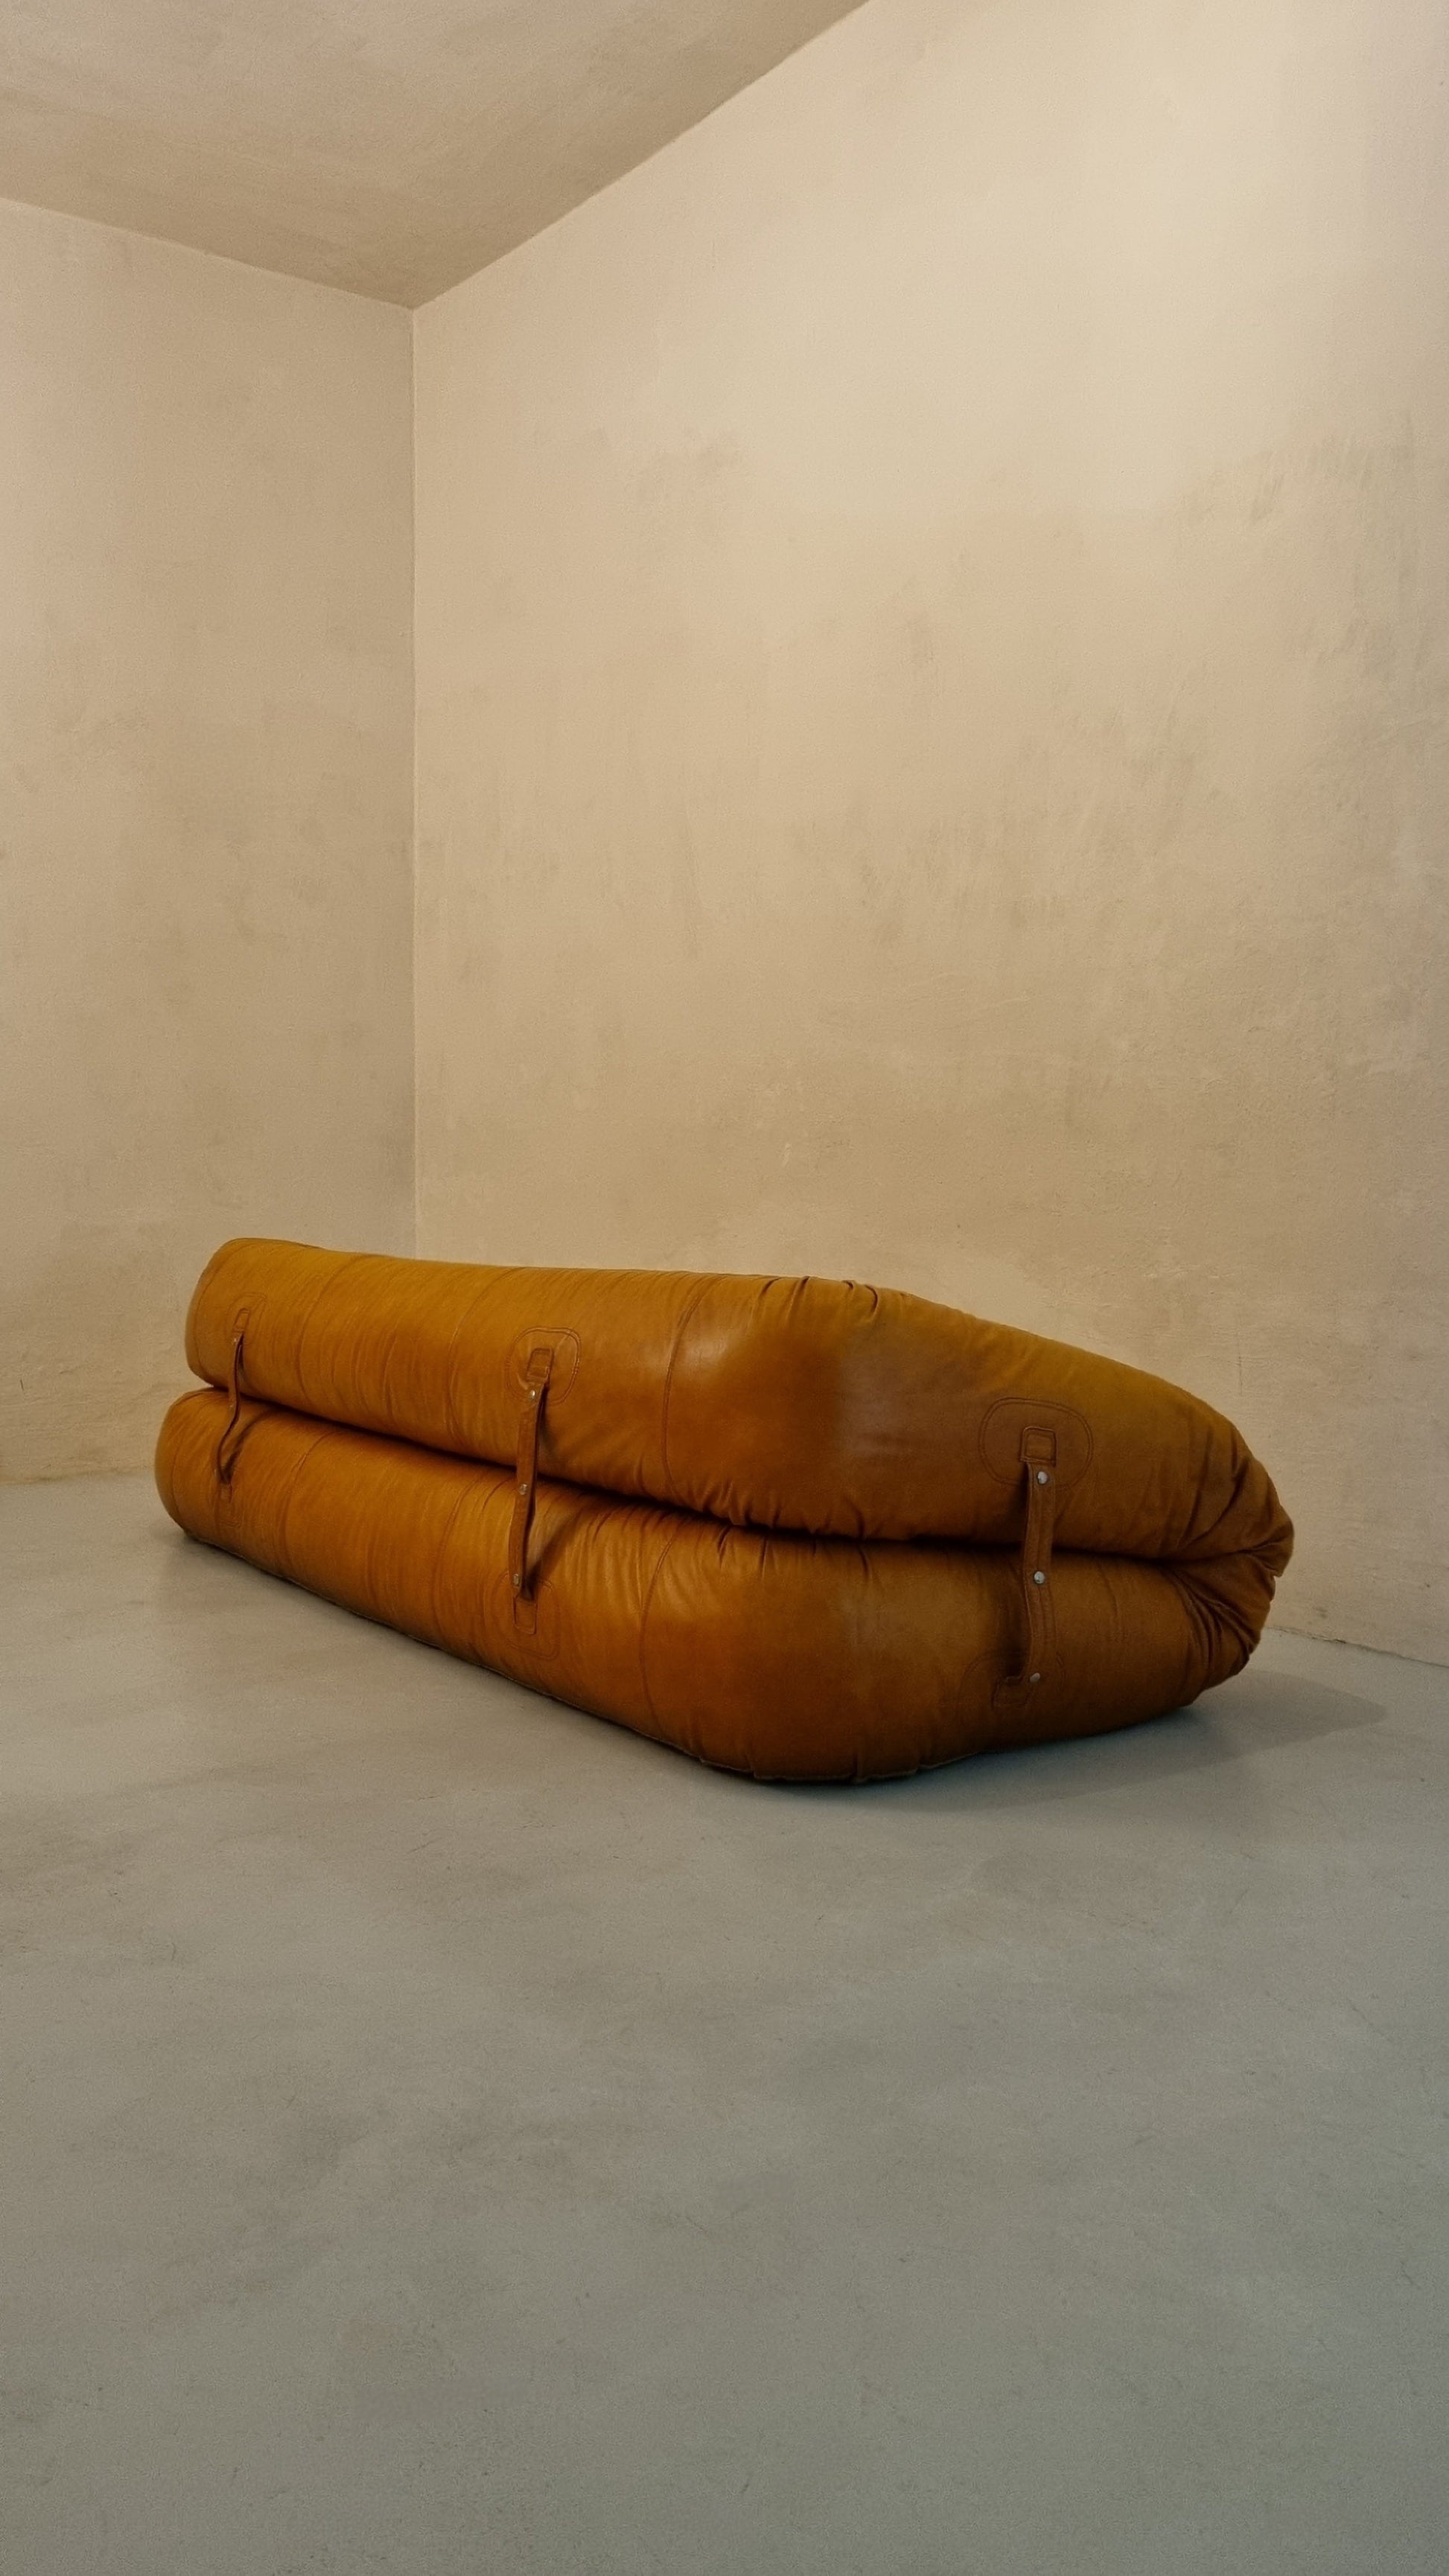 Anfibio Sofa Bed by Alessandro Becchi for Giovannetti Sofas Vintage